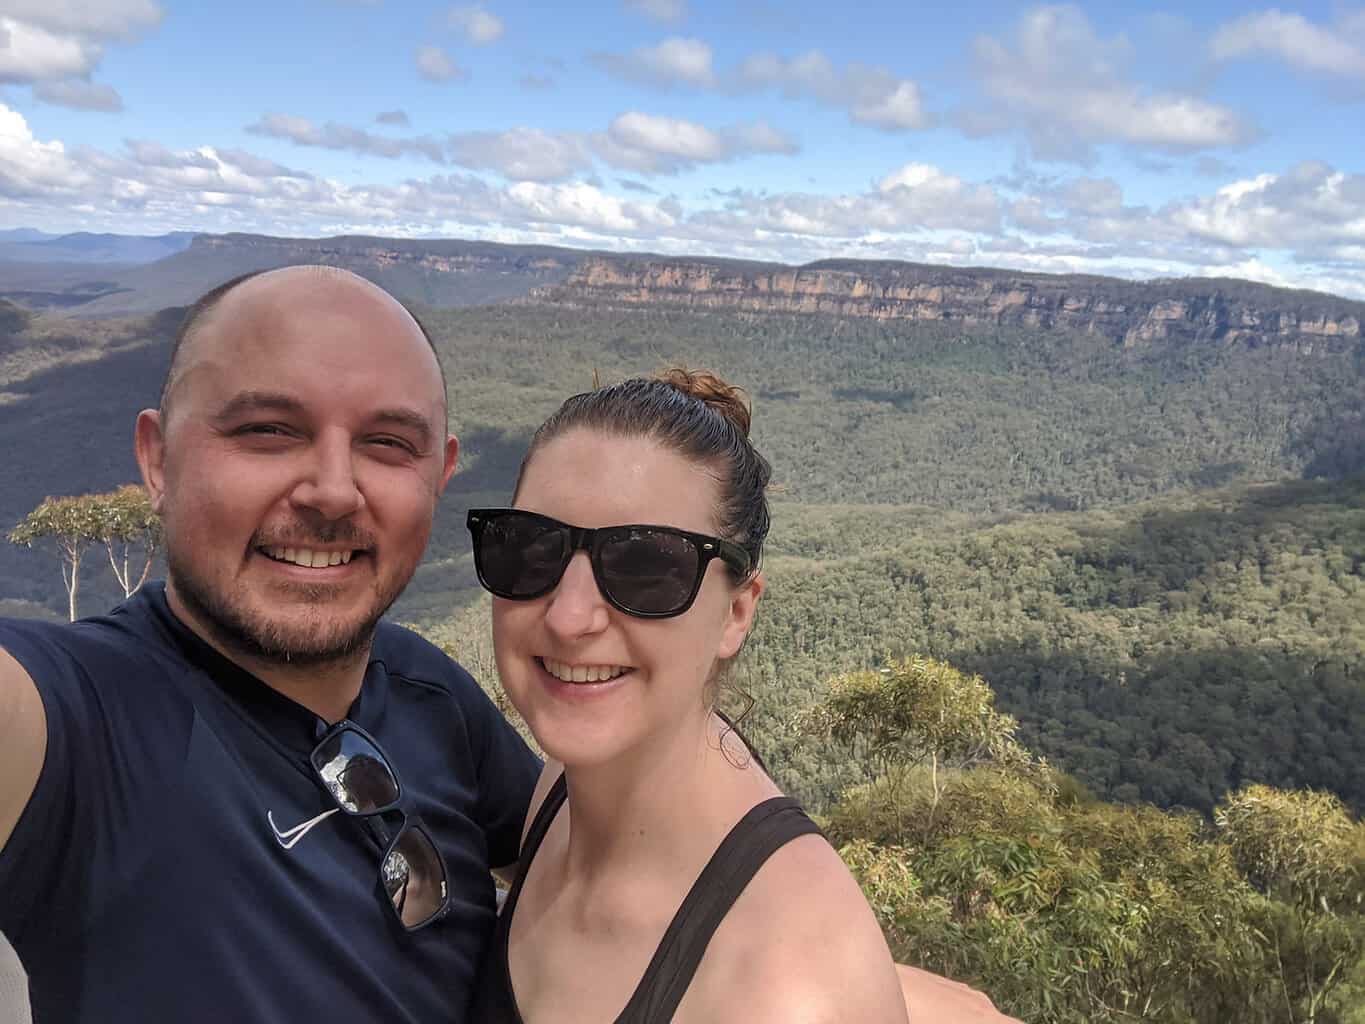 Standing at Echo Point viewpoint with sweeping views across the valley of the Blue Mountains National Park